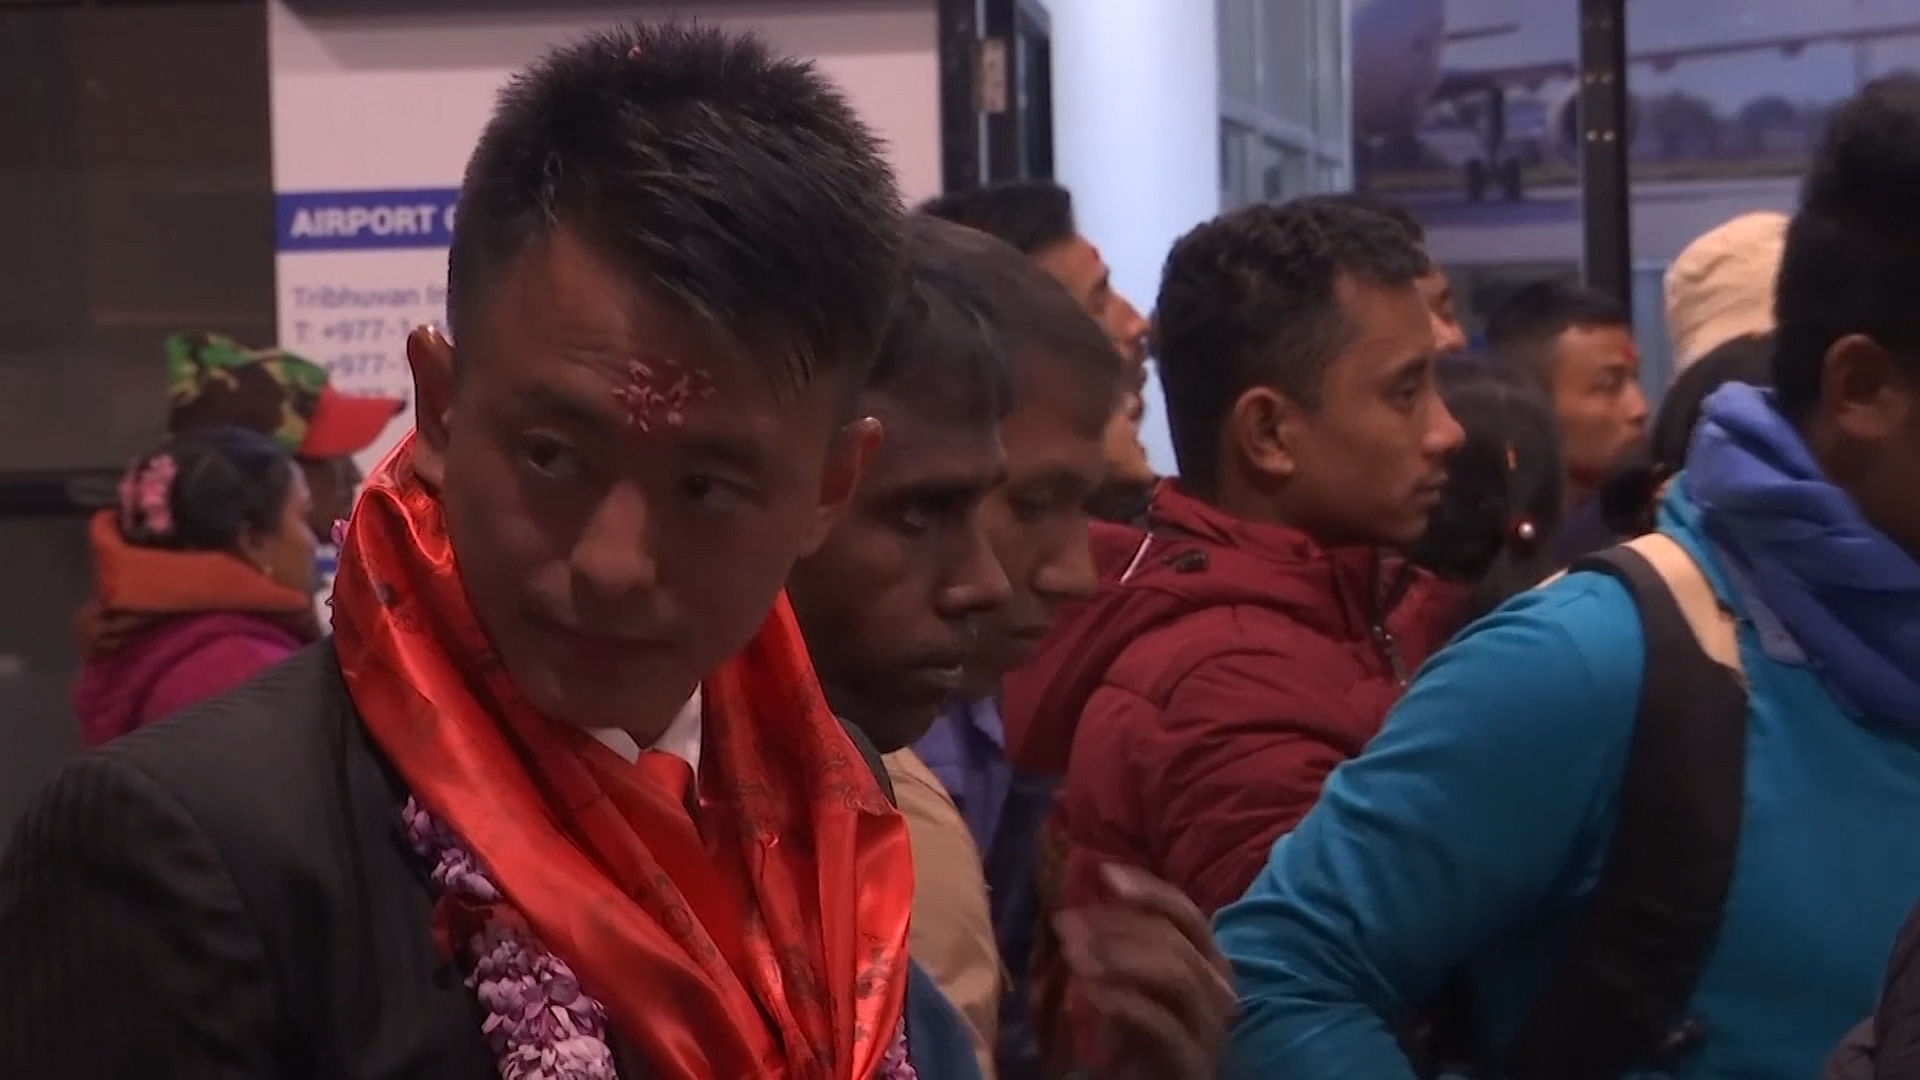 Nepal exports iron and steel, carpets, some vegetables - but mainly, Nepal exports men, about 500,000 a year. (Photo: AP screengrab)